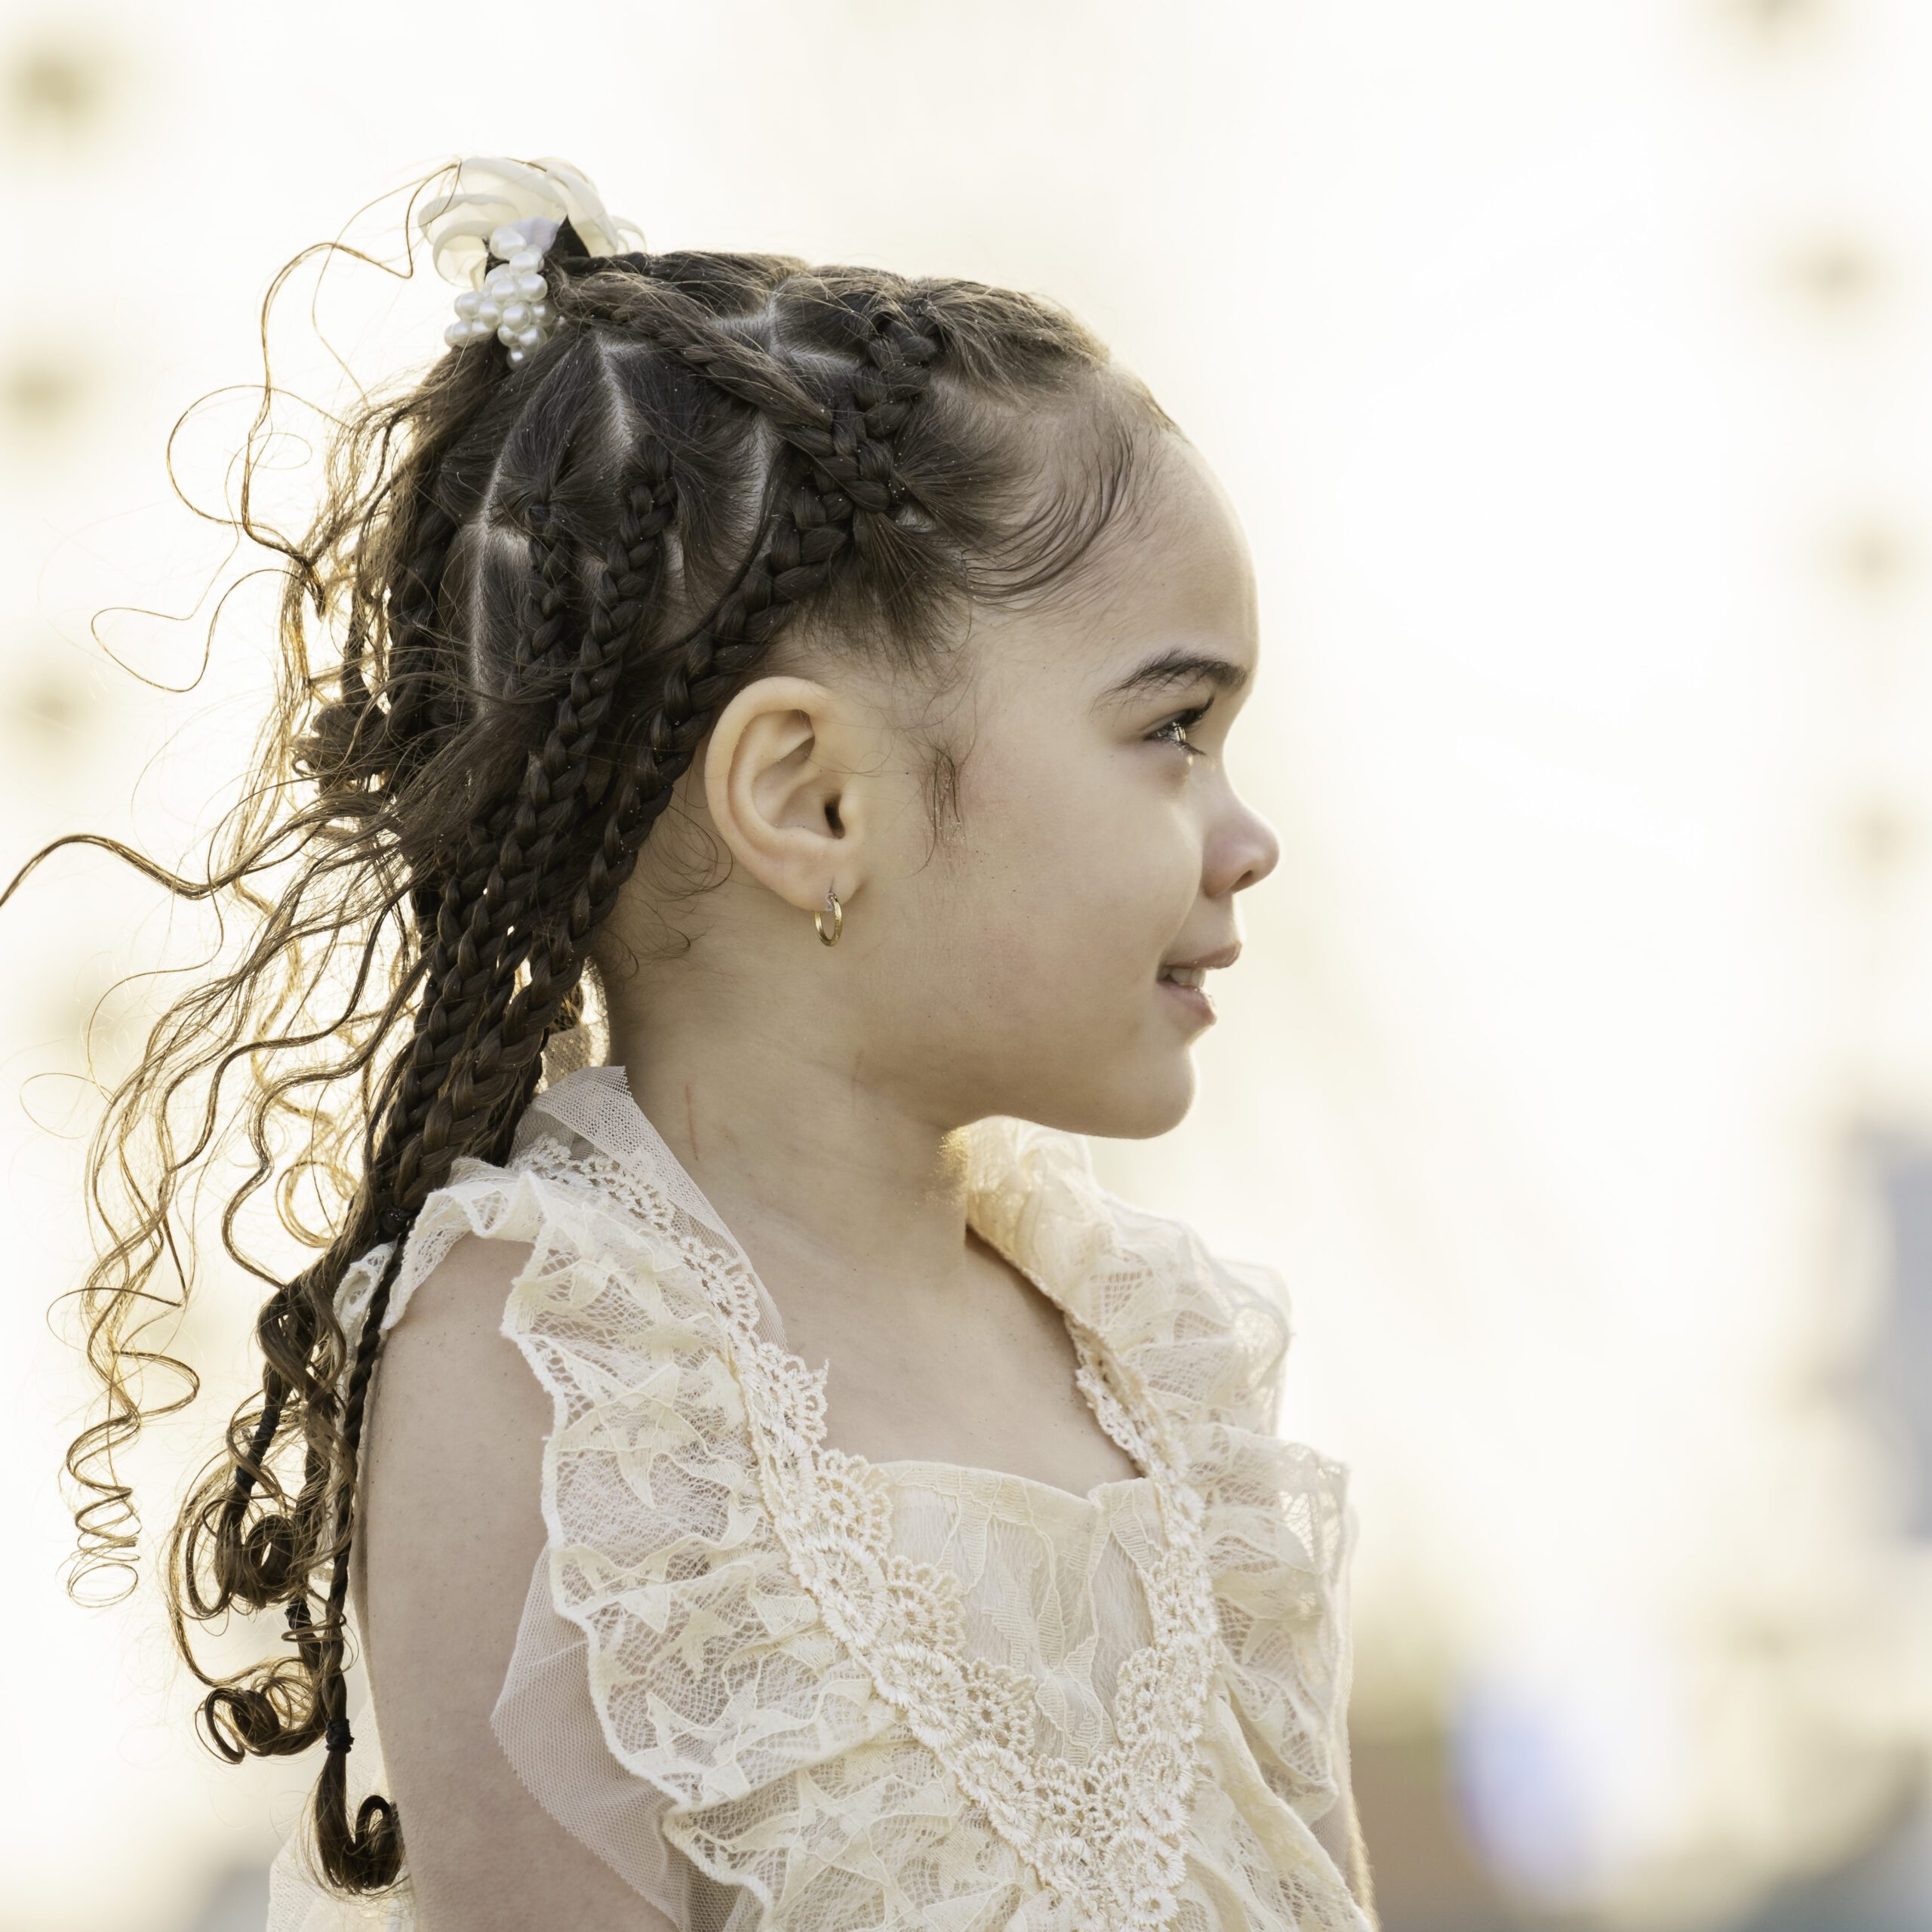 a young girl with long hair wearing a white dress